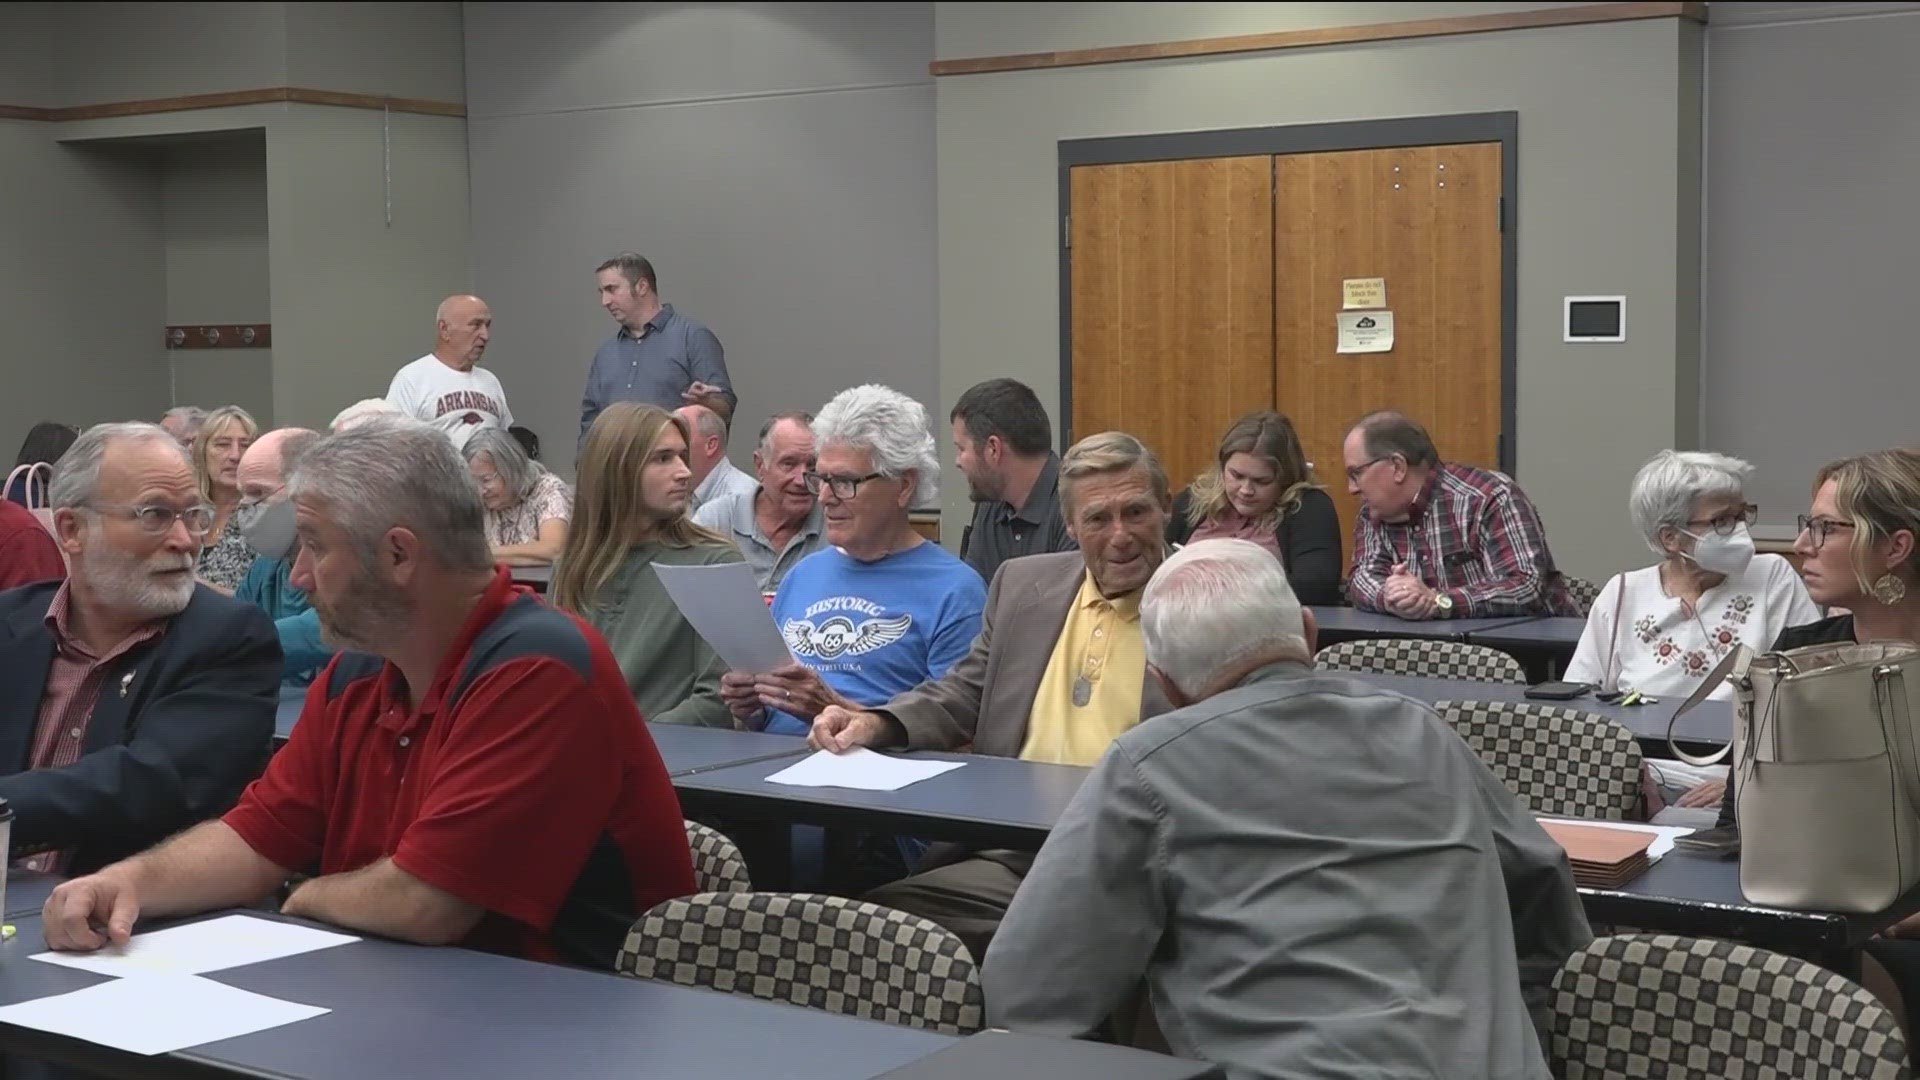 A town hall was held in Fort Smith tonight to get public input on a FOIA amendment constructed to protect citizen's rights to information regarding government.